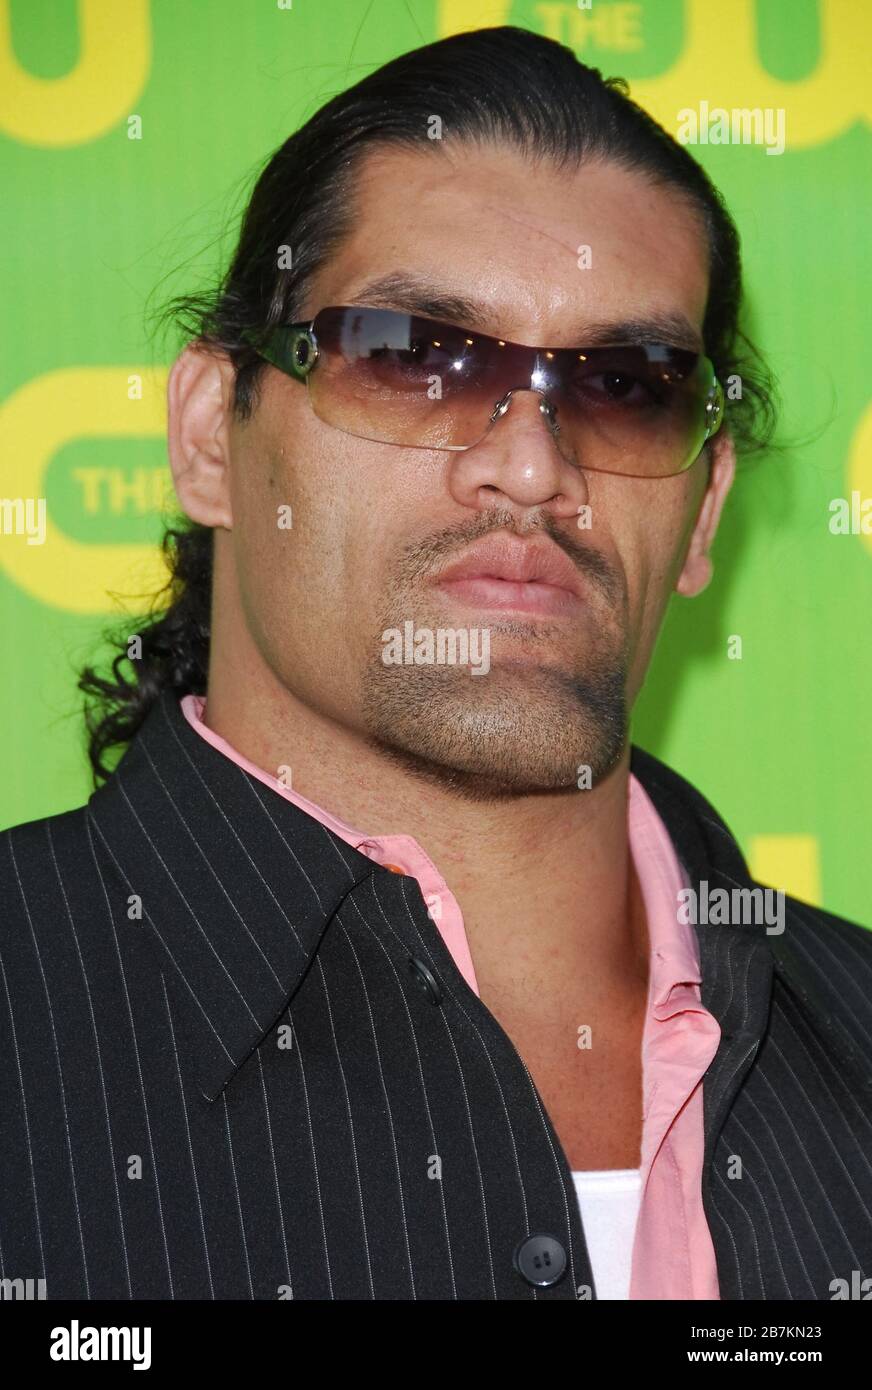 The Great Khali at The CW Network Launch Party held at the Warner Bros. Studios - Main Lot in Burbank, CA. The event took place on Monday, September 18, 2006.  Photo by: SBM / PictureLux - File Reference # 33984-6974SBMPLX Stock Photo